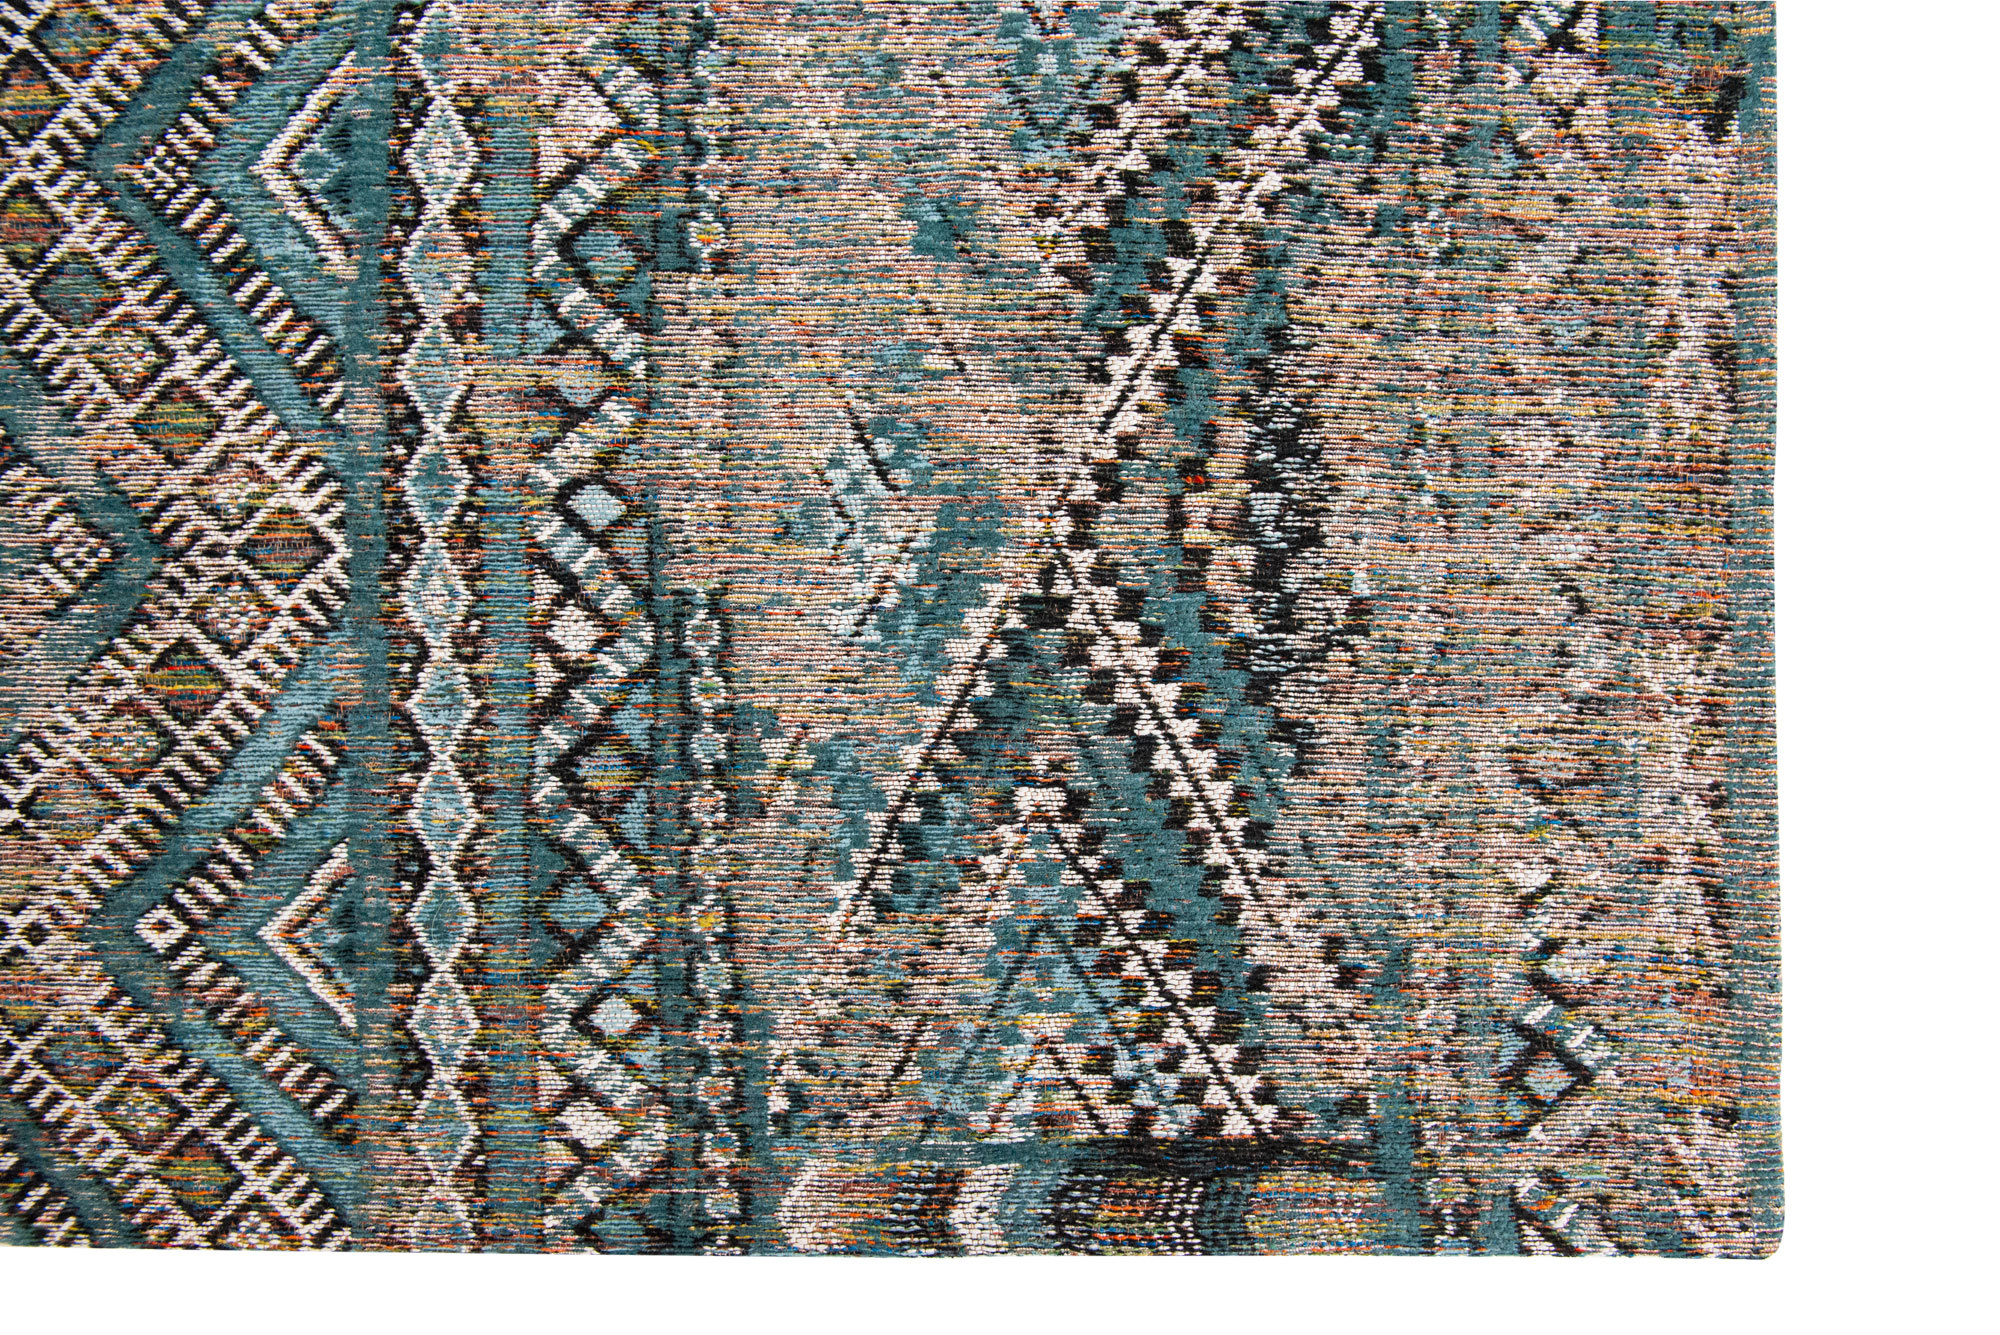 Antiquarian Flatwoven Rug ☞ Size: 9' 2" x 13' (280 x 390 cm)